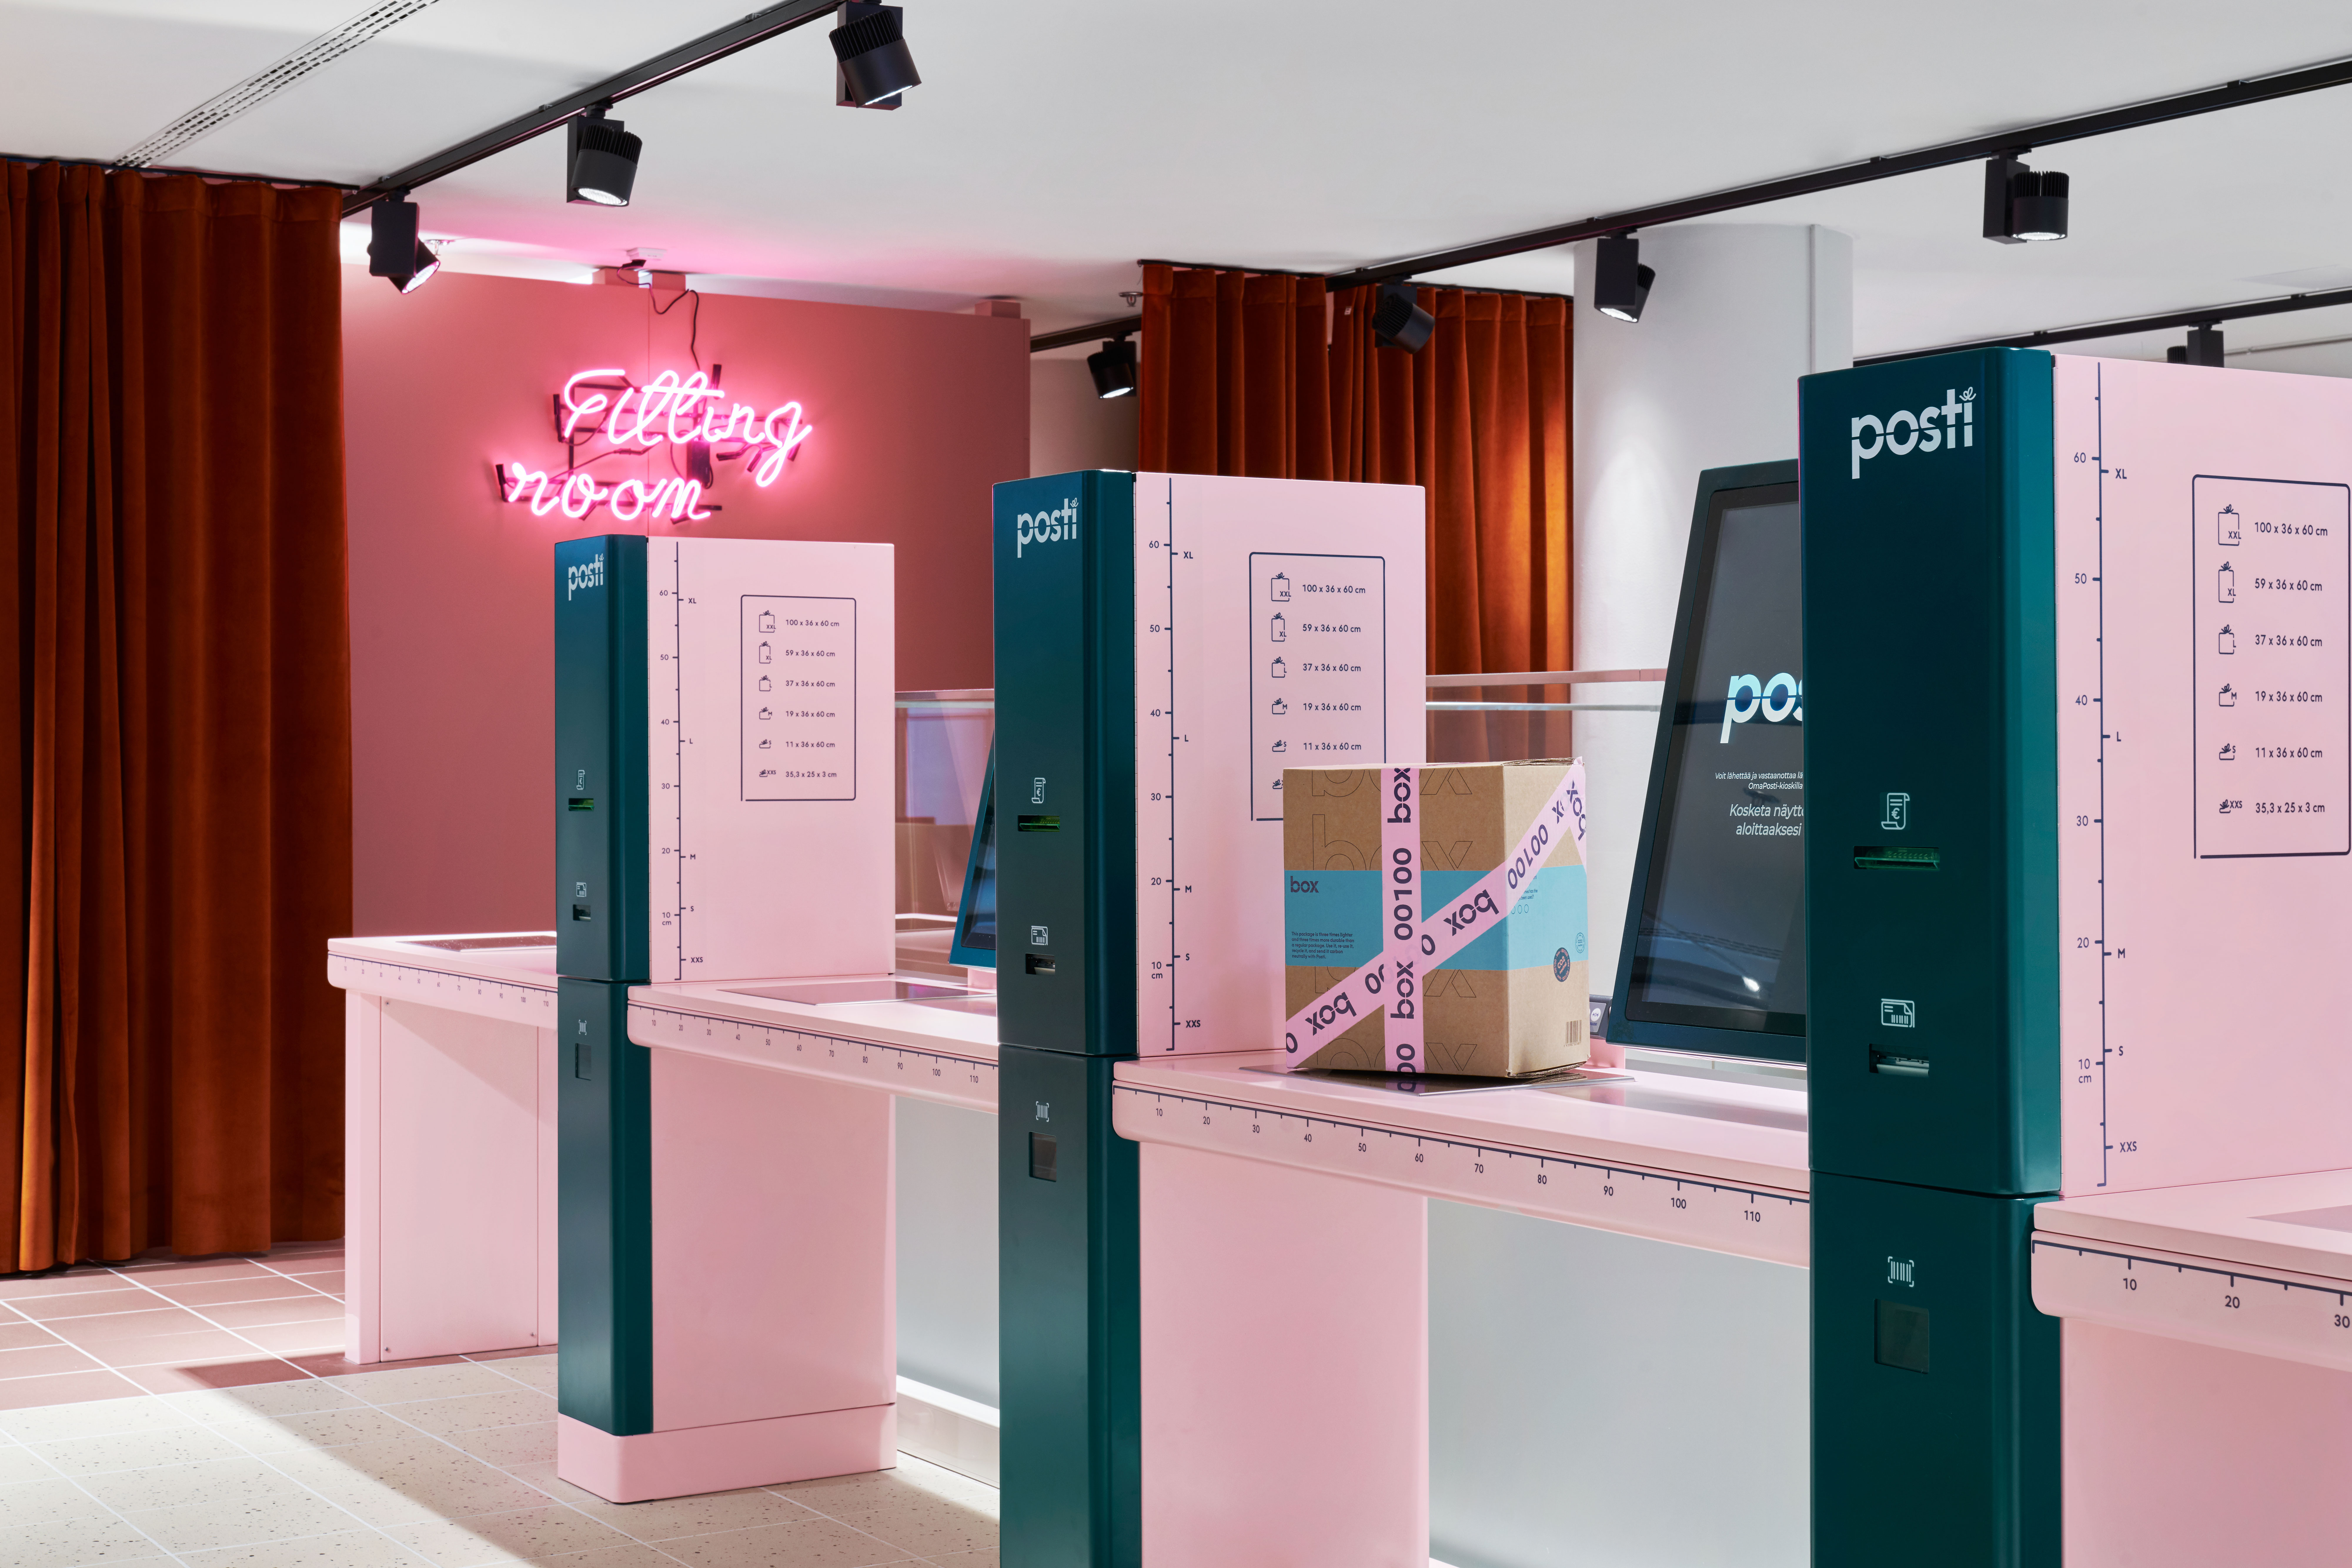 cute self-service stations in baby pink color